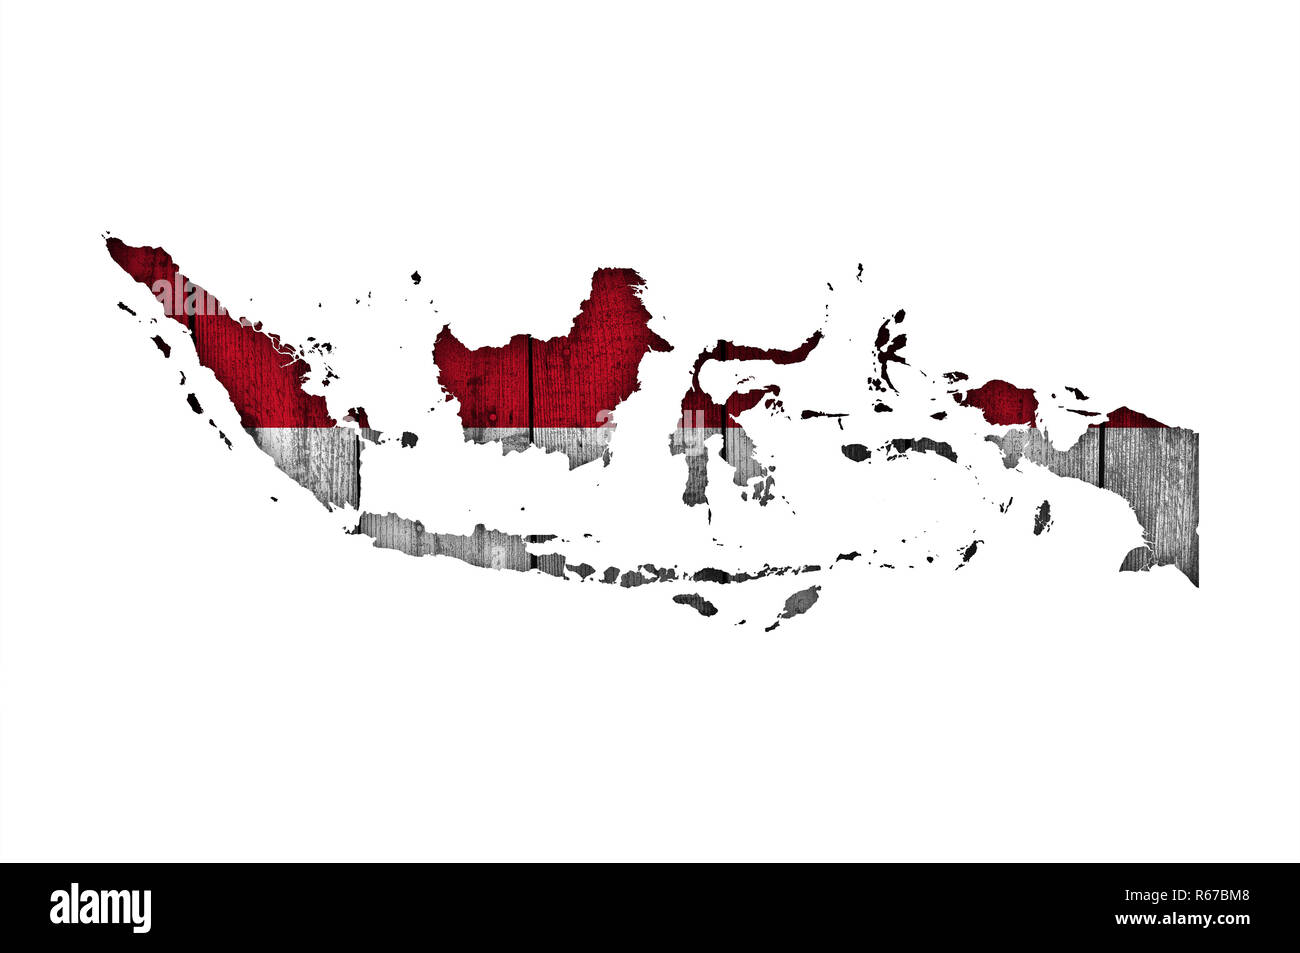 map and banner of indonesia on weathered wood Stock Photo